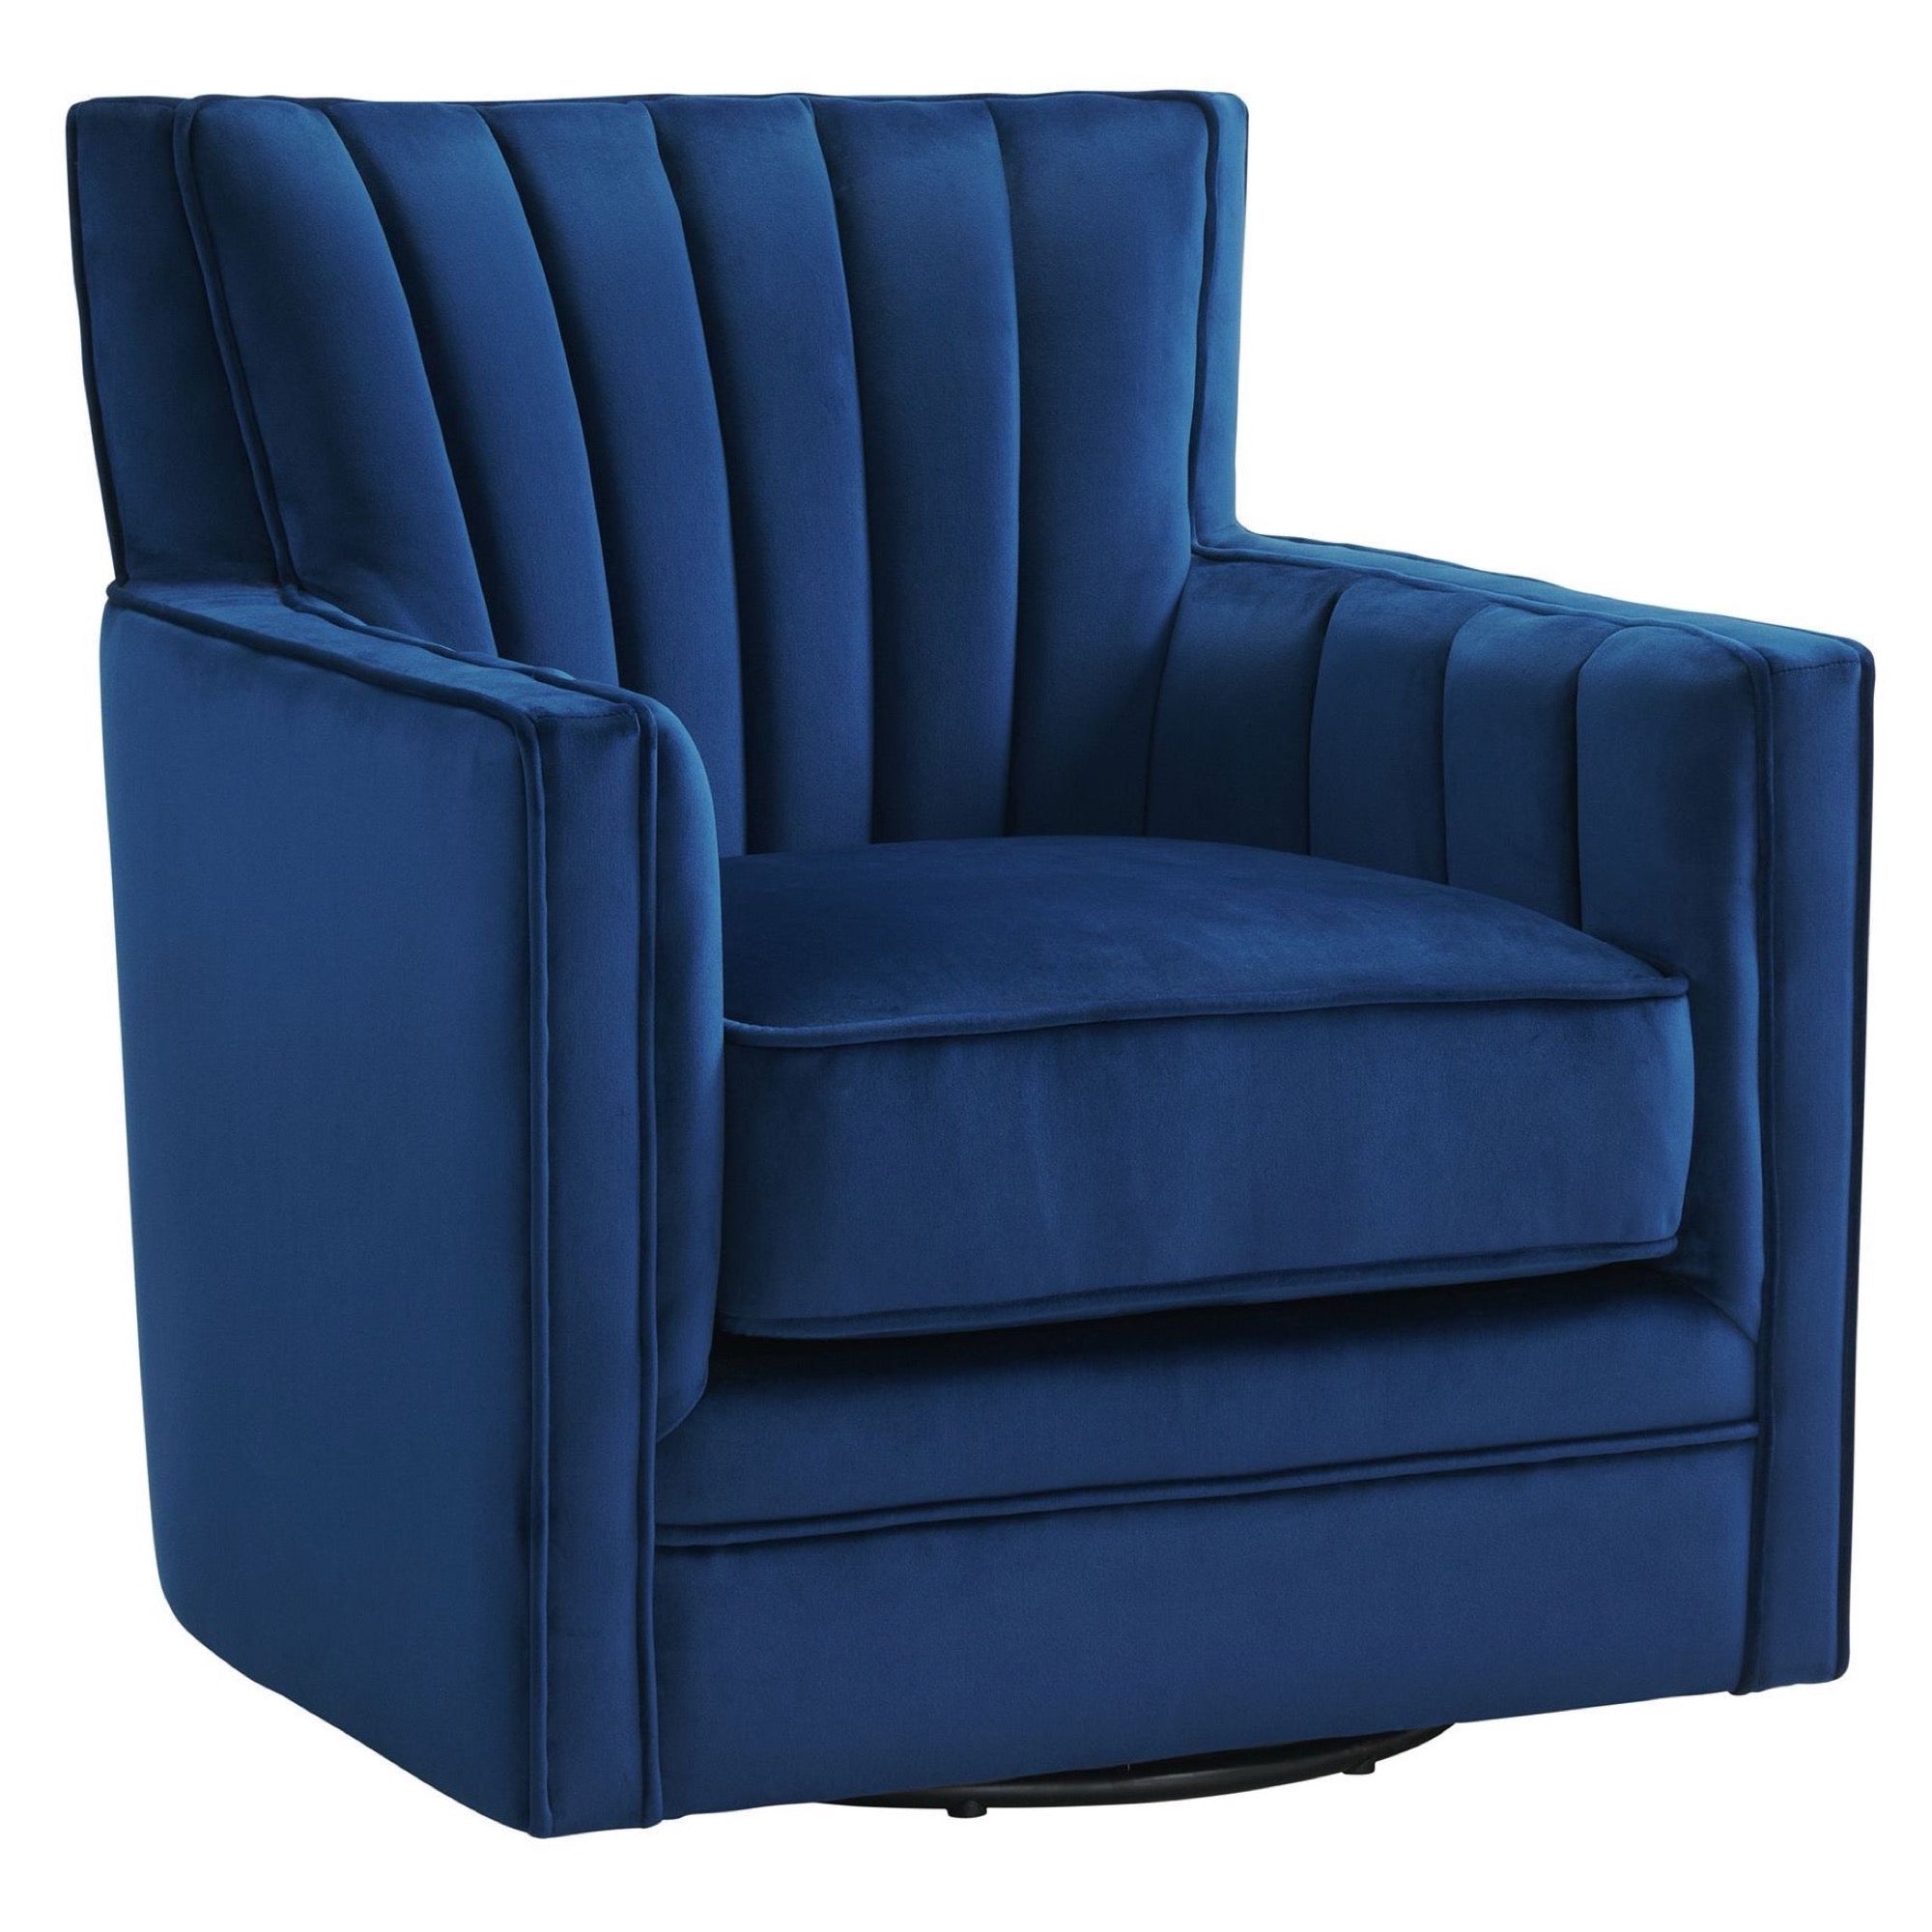 Loden Swivel Chair in Royale Cobalt